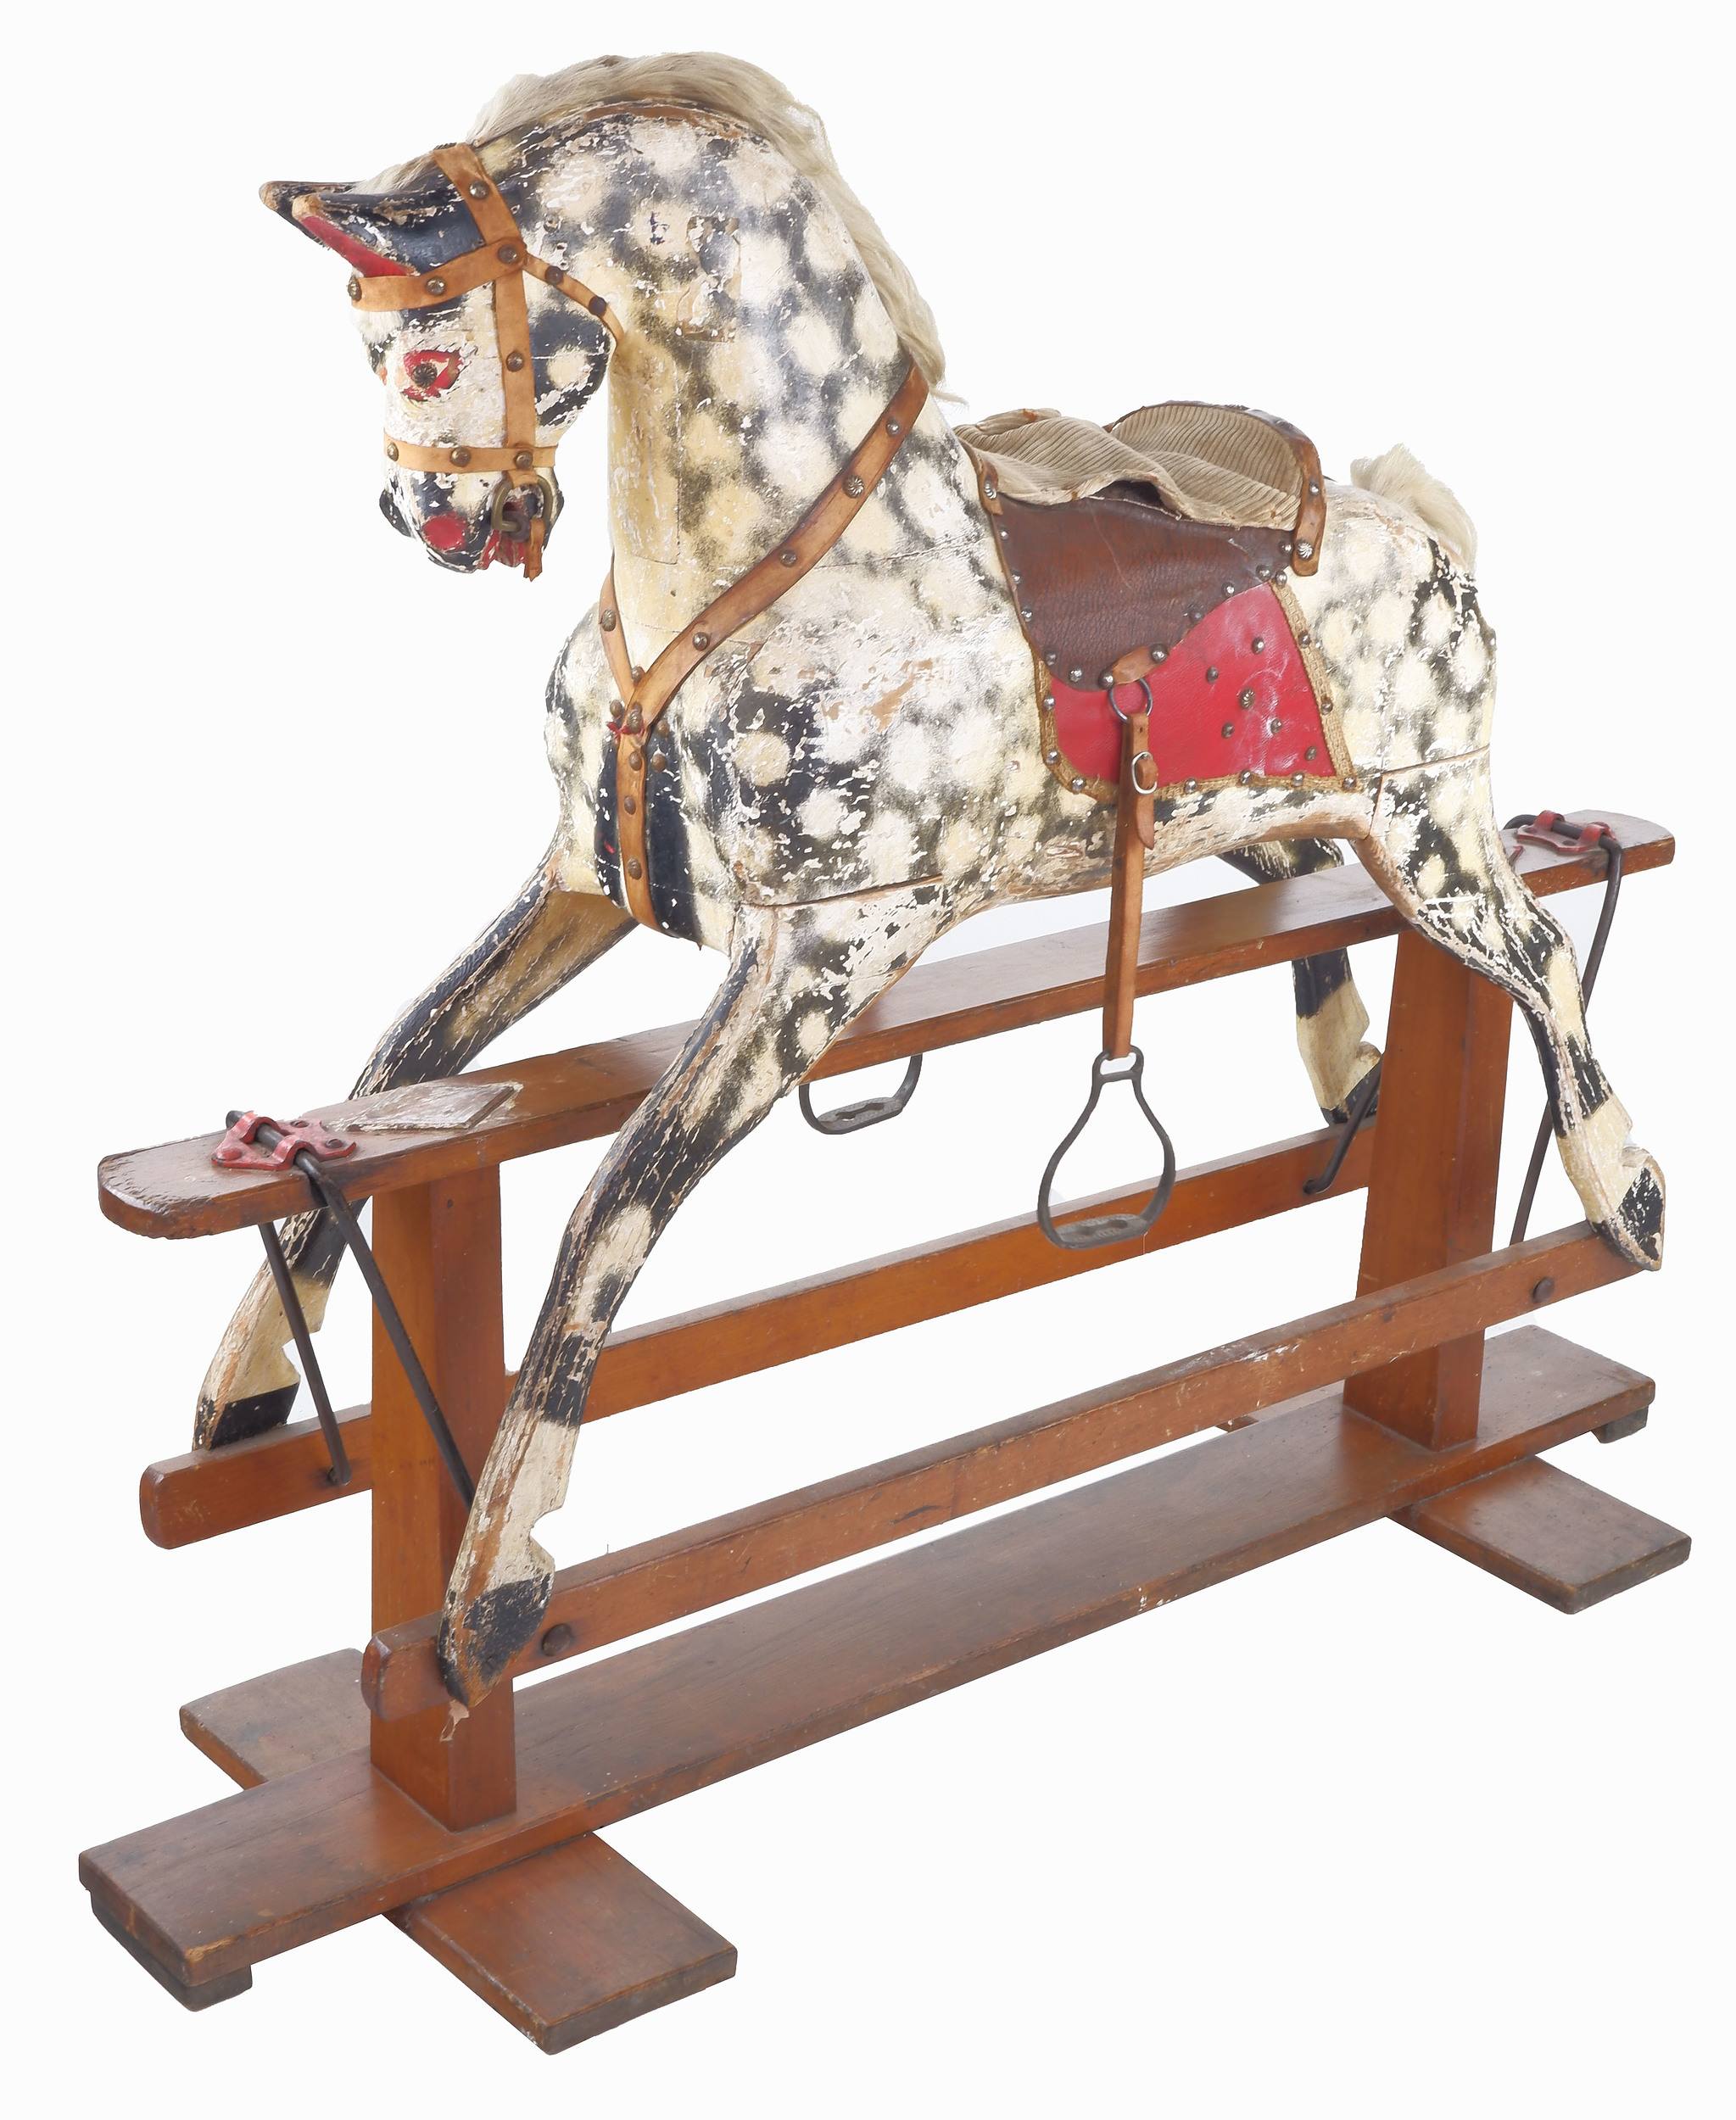 'Large Hand Crafted Rocking Horse, Probebly Lines Brothers for Triang, Early to Mid 20th Century'